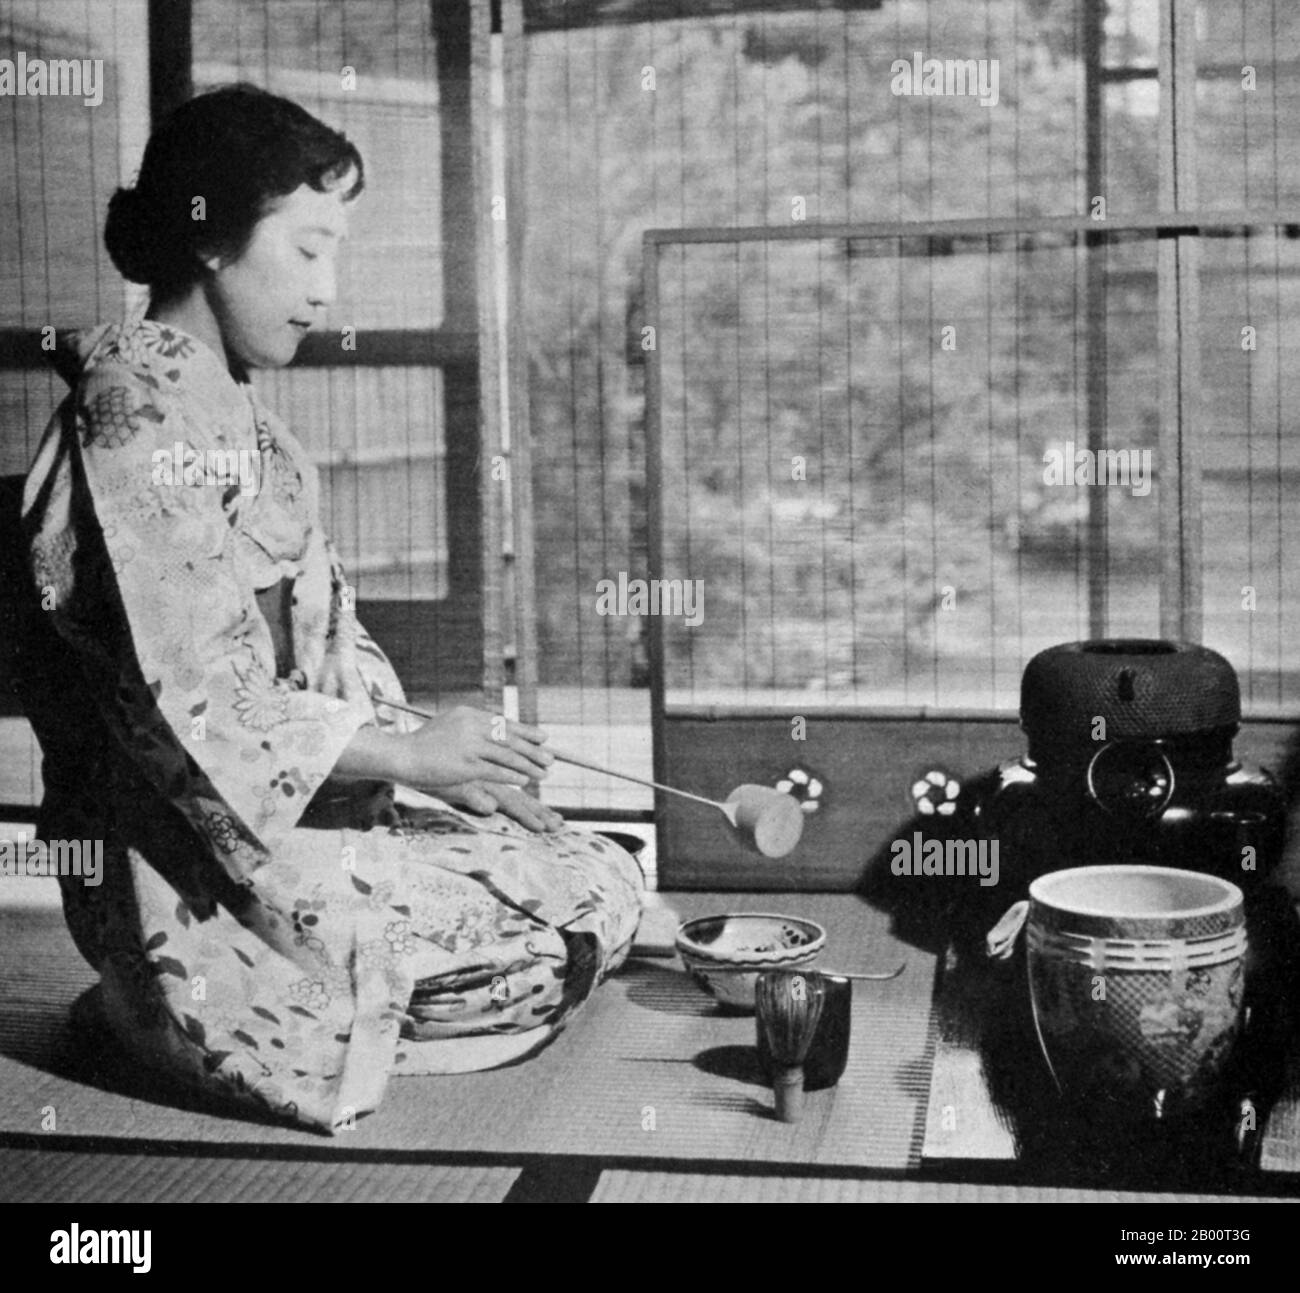 Japan Post World War Ii A Kimono Clad Geisha Performing Chanoyu Tea Ceremony 1950s On 6 August And 9 August 1945 The Usa Dropped Two Atomic Bombs On Hiroshima And On Nagasaki Respectively